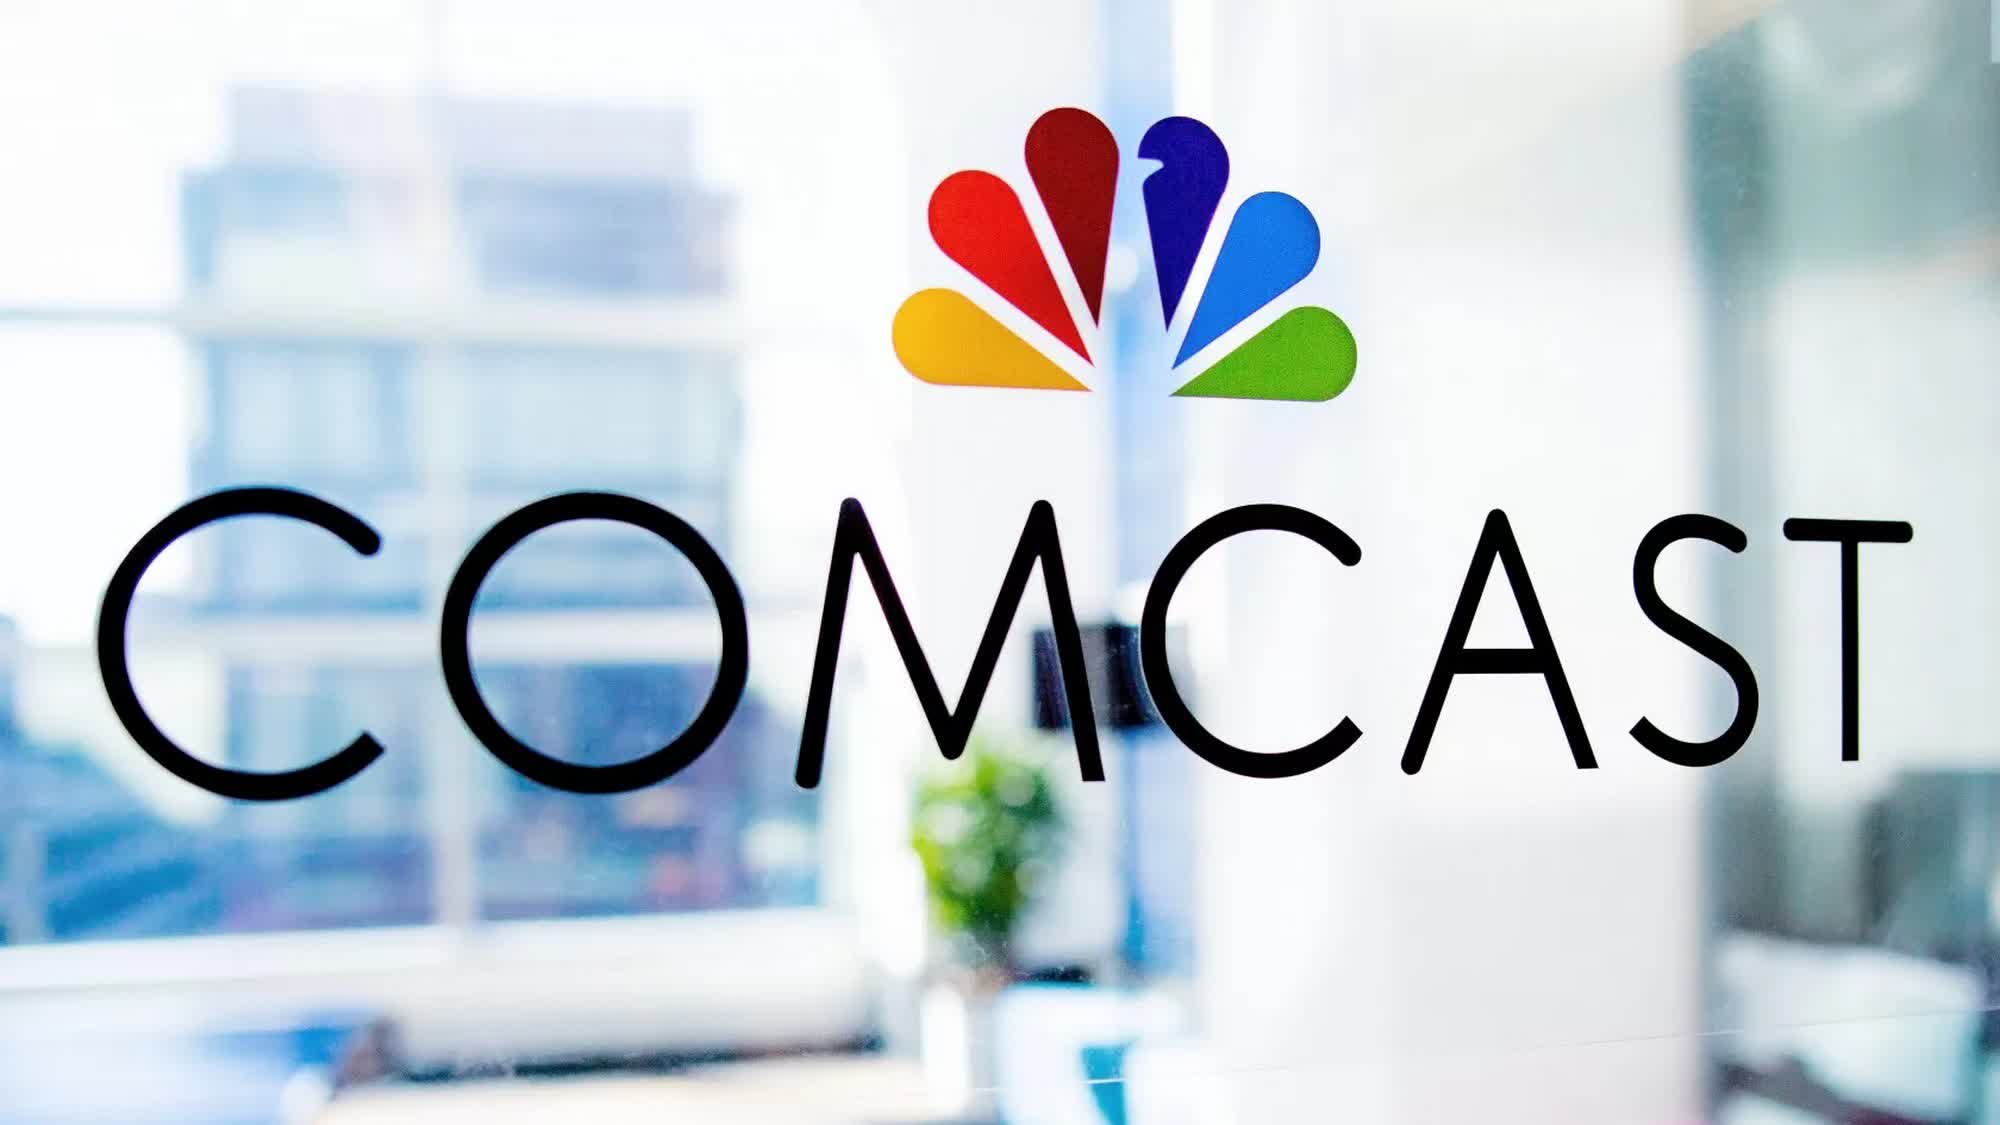 Not amused by Comcast 10G network claims, Verizon and T-Mobile are complaining